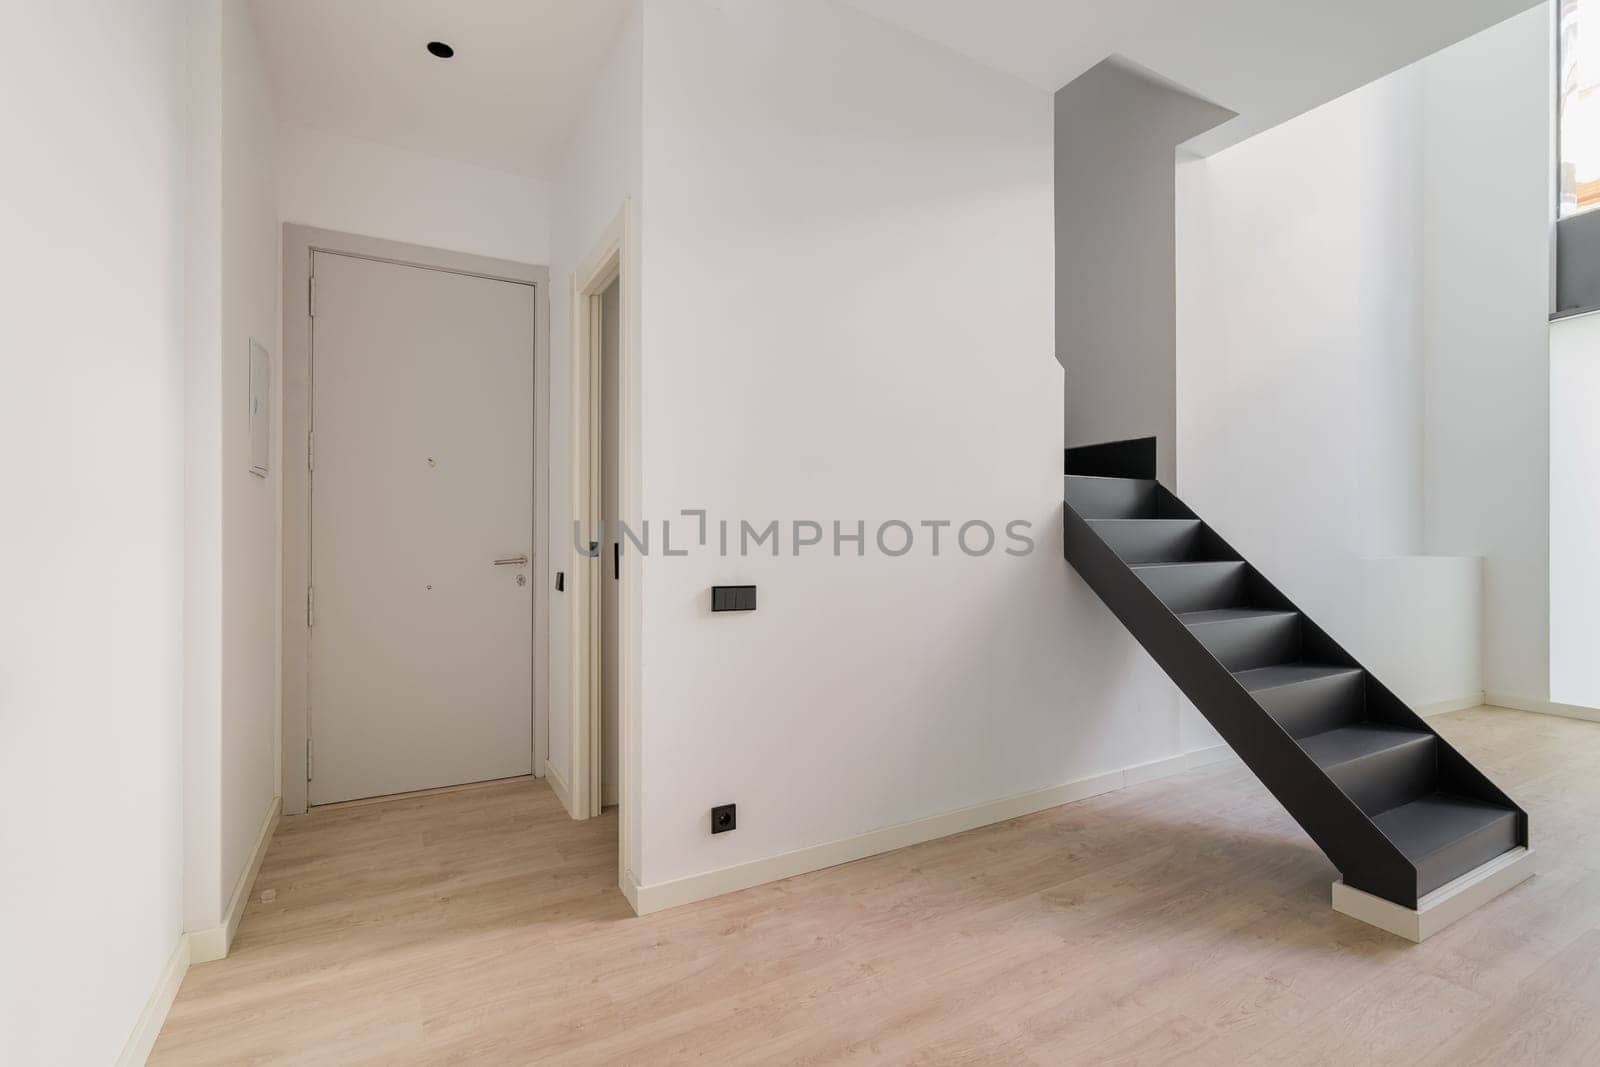 Interior of empty renovated apartment in a duplex flat with black stairs leading to the second floor